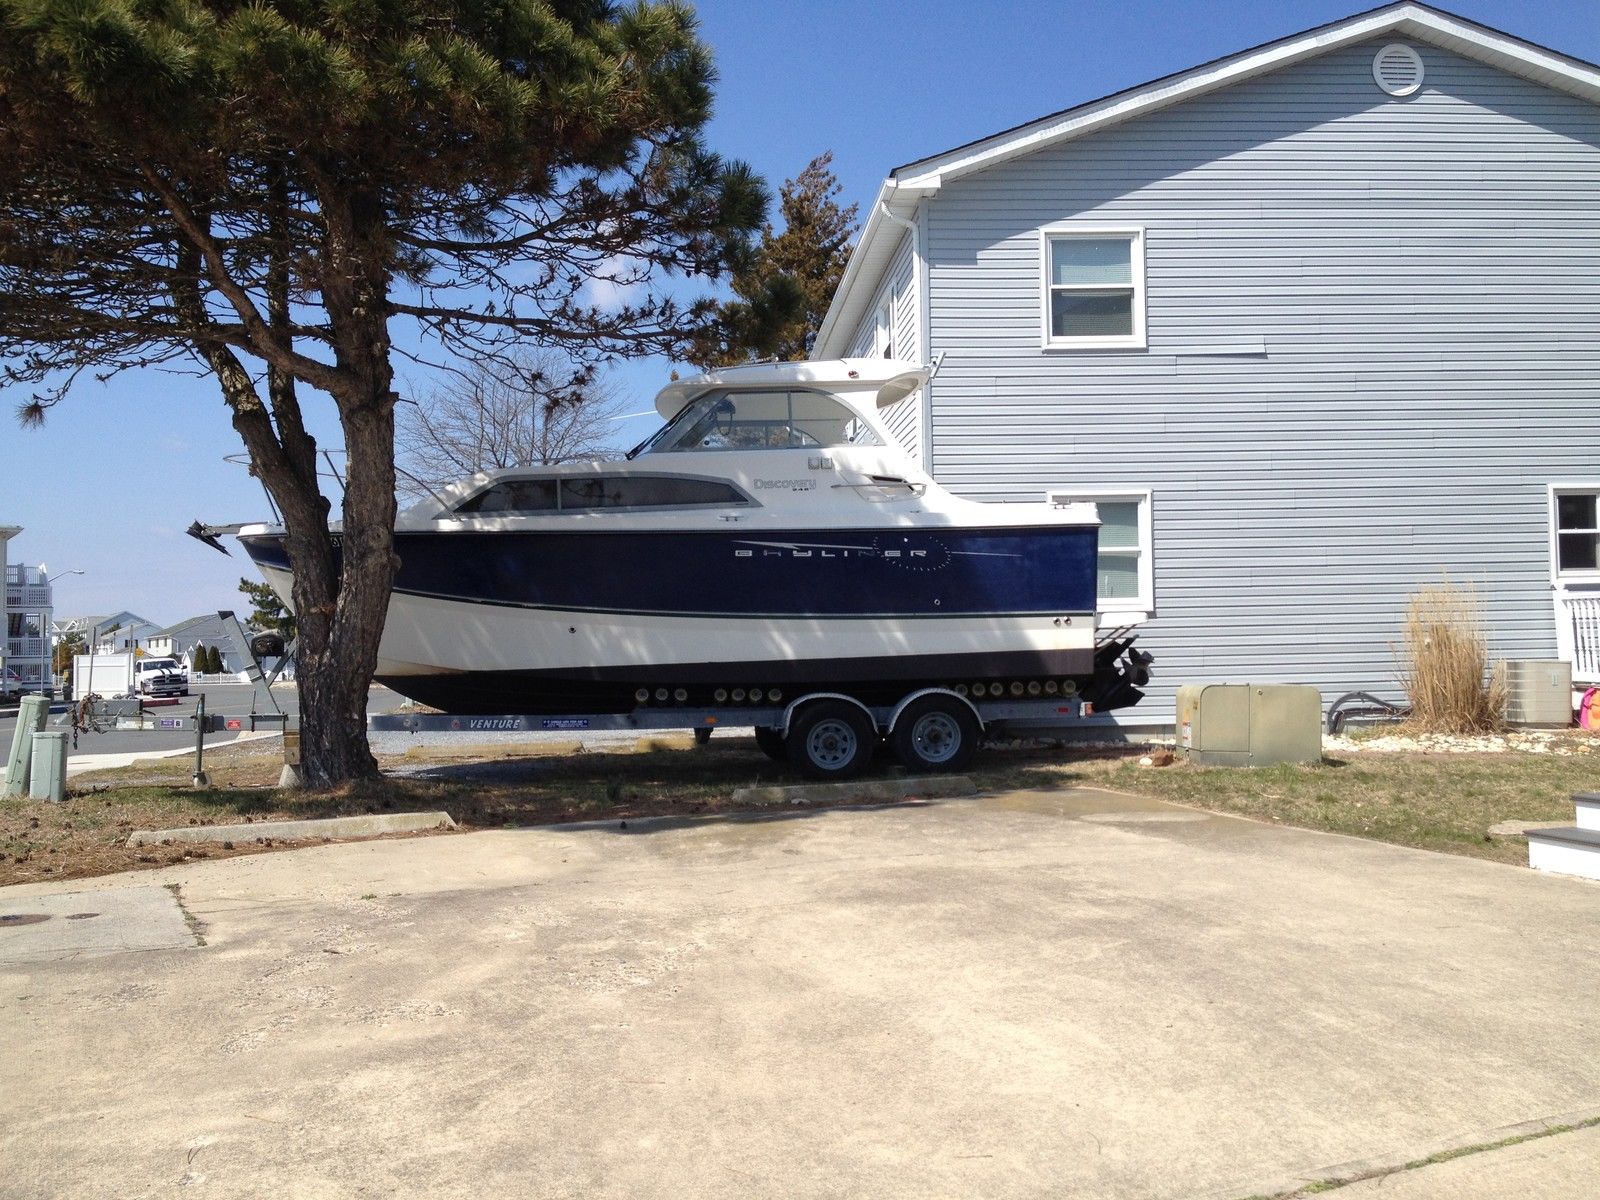 Bayliner Discovery 246